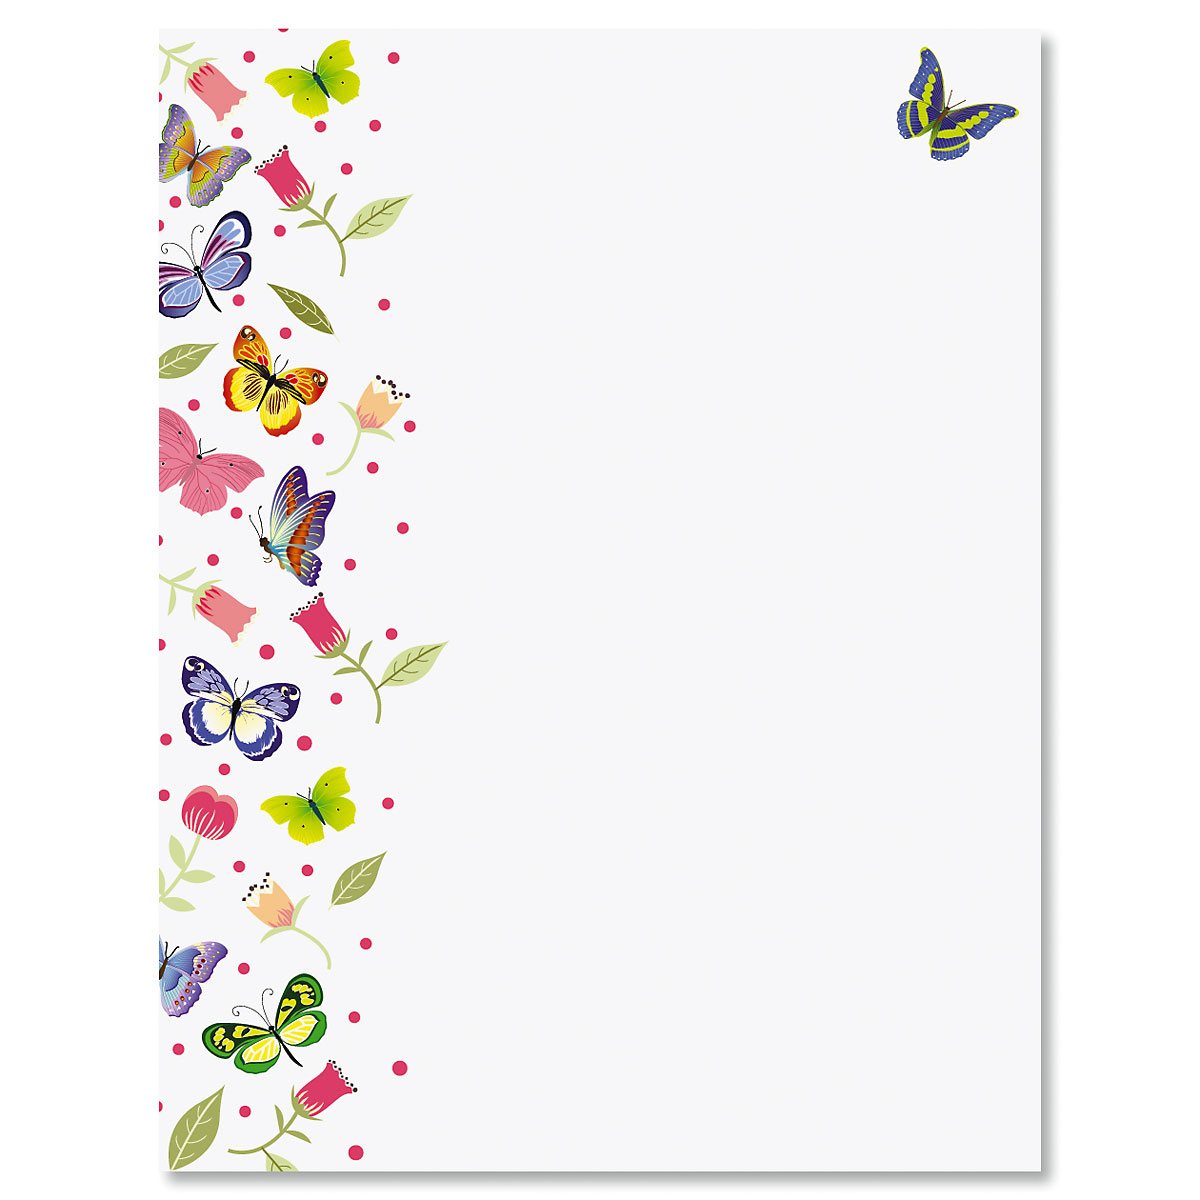 Vintage-Style Butterflies Letter Writing Stationery Kit | Marmalade Mercantile